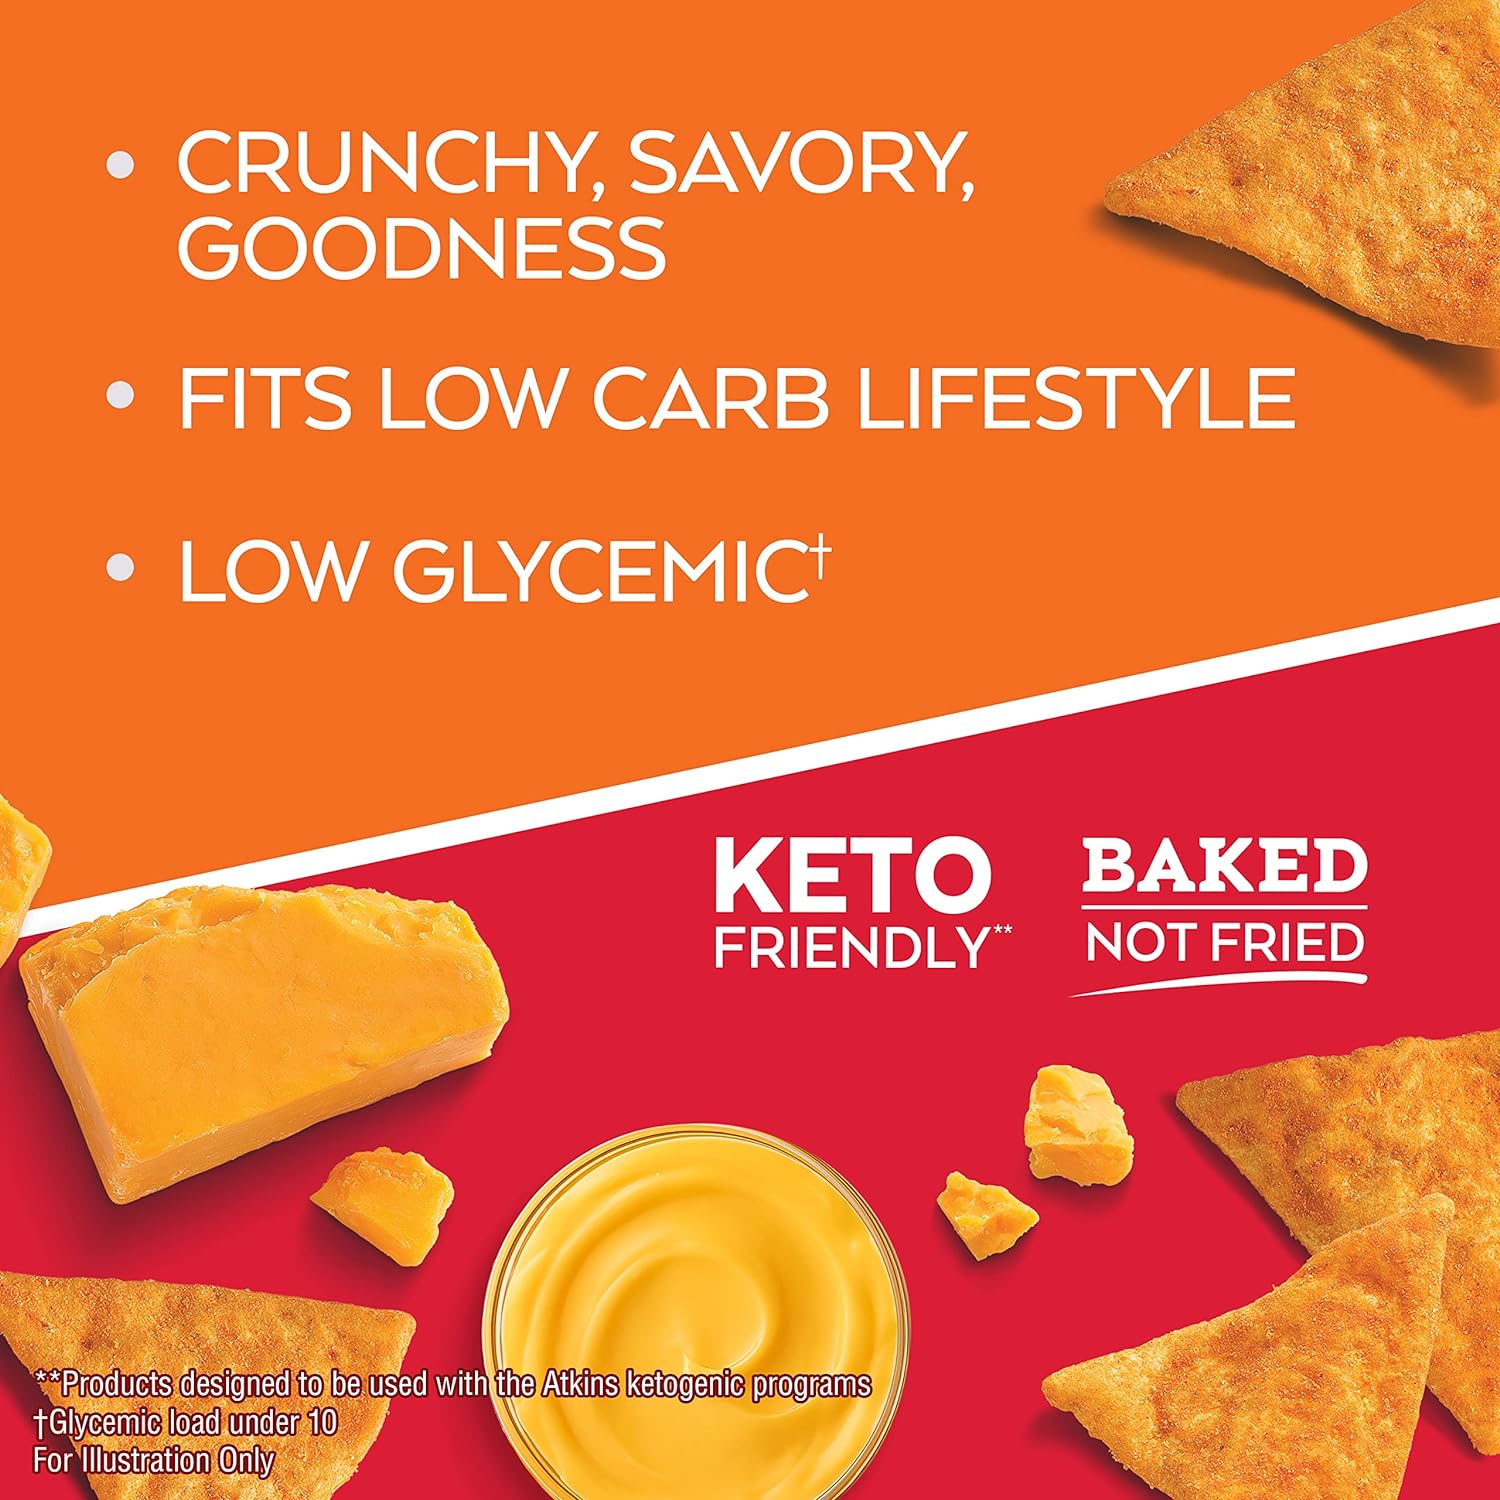 Atkins Nacho Cheese Protein Chips, 4g Net Carbs, 13g Protein, Gluten Free, Low Glycemic, Keto Friendly, 12 Count : Health & Household